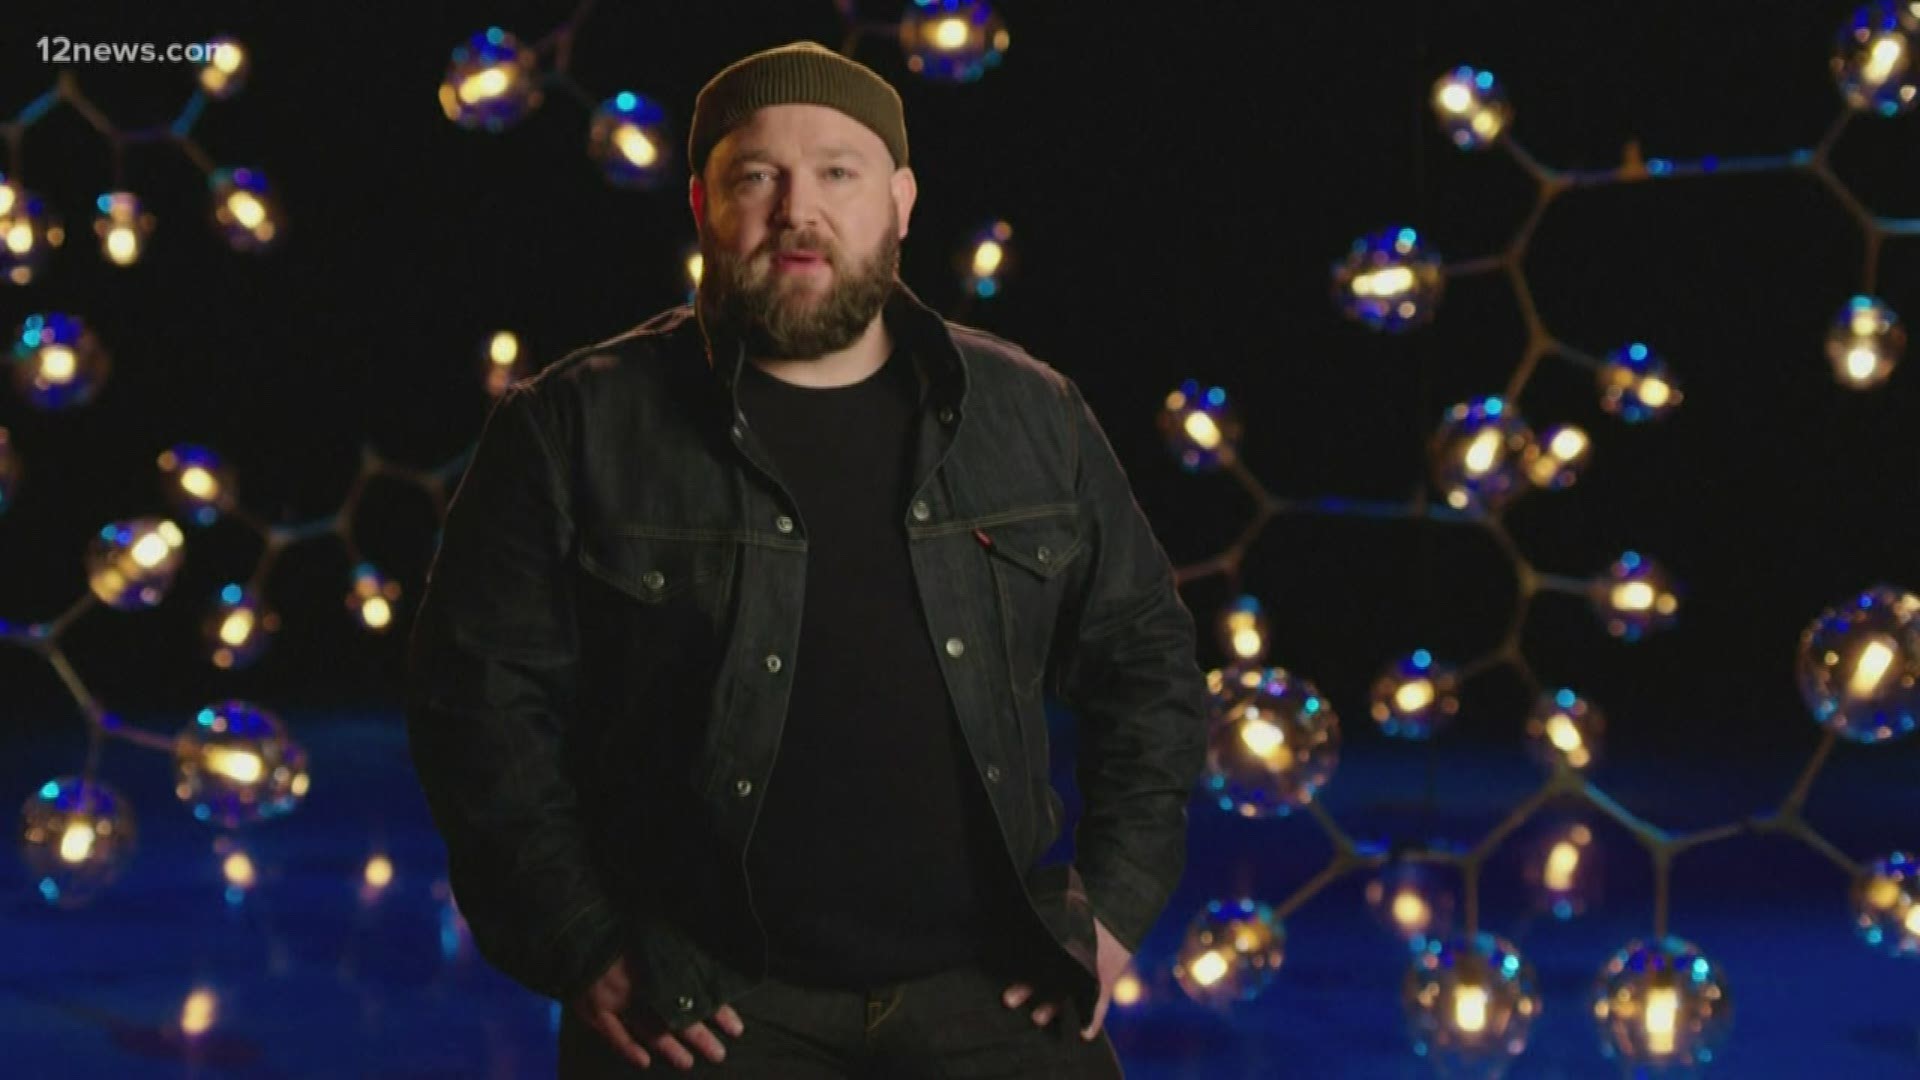 Ryan Innes from Thatcher, AZ is pitching his original song on NBC's hit show, "Songland". He describes the experience as nerve-wracking and amazing.